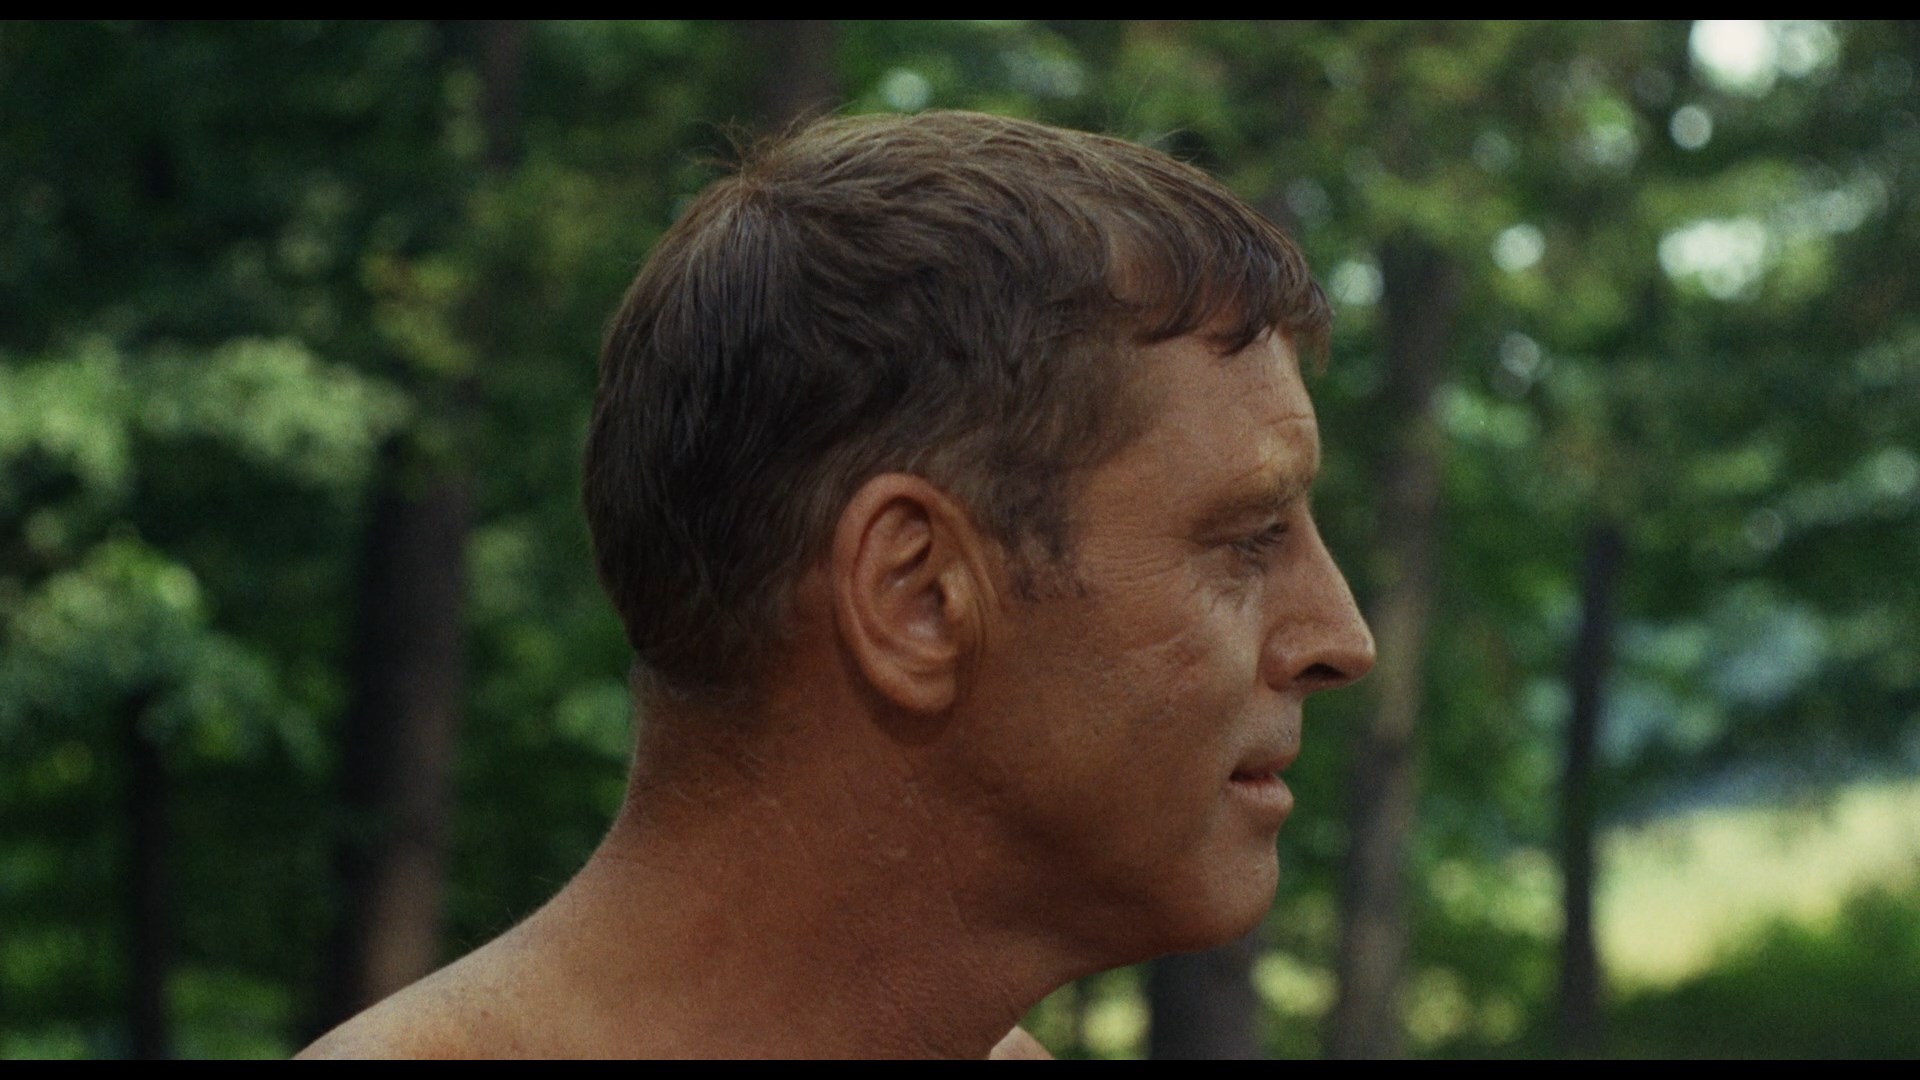 The The Swimmer